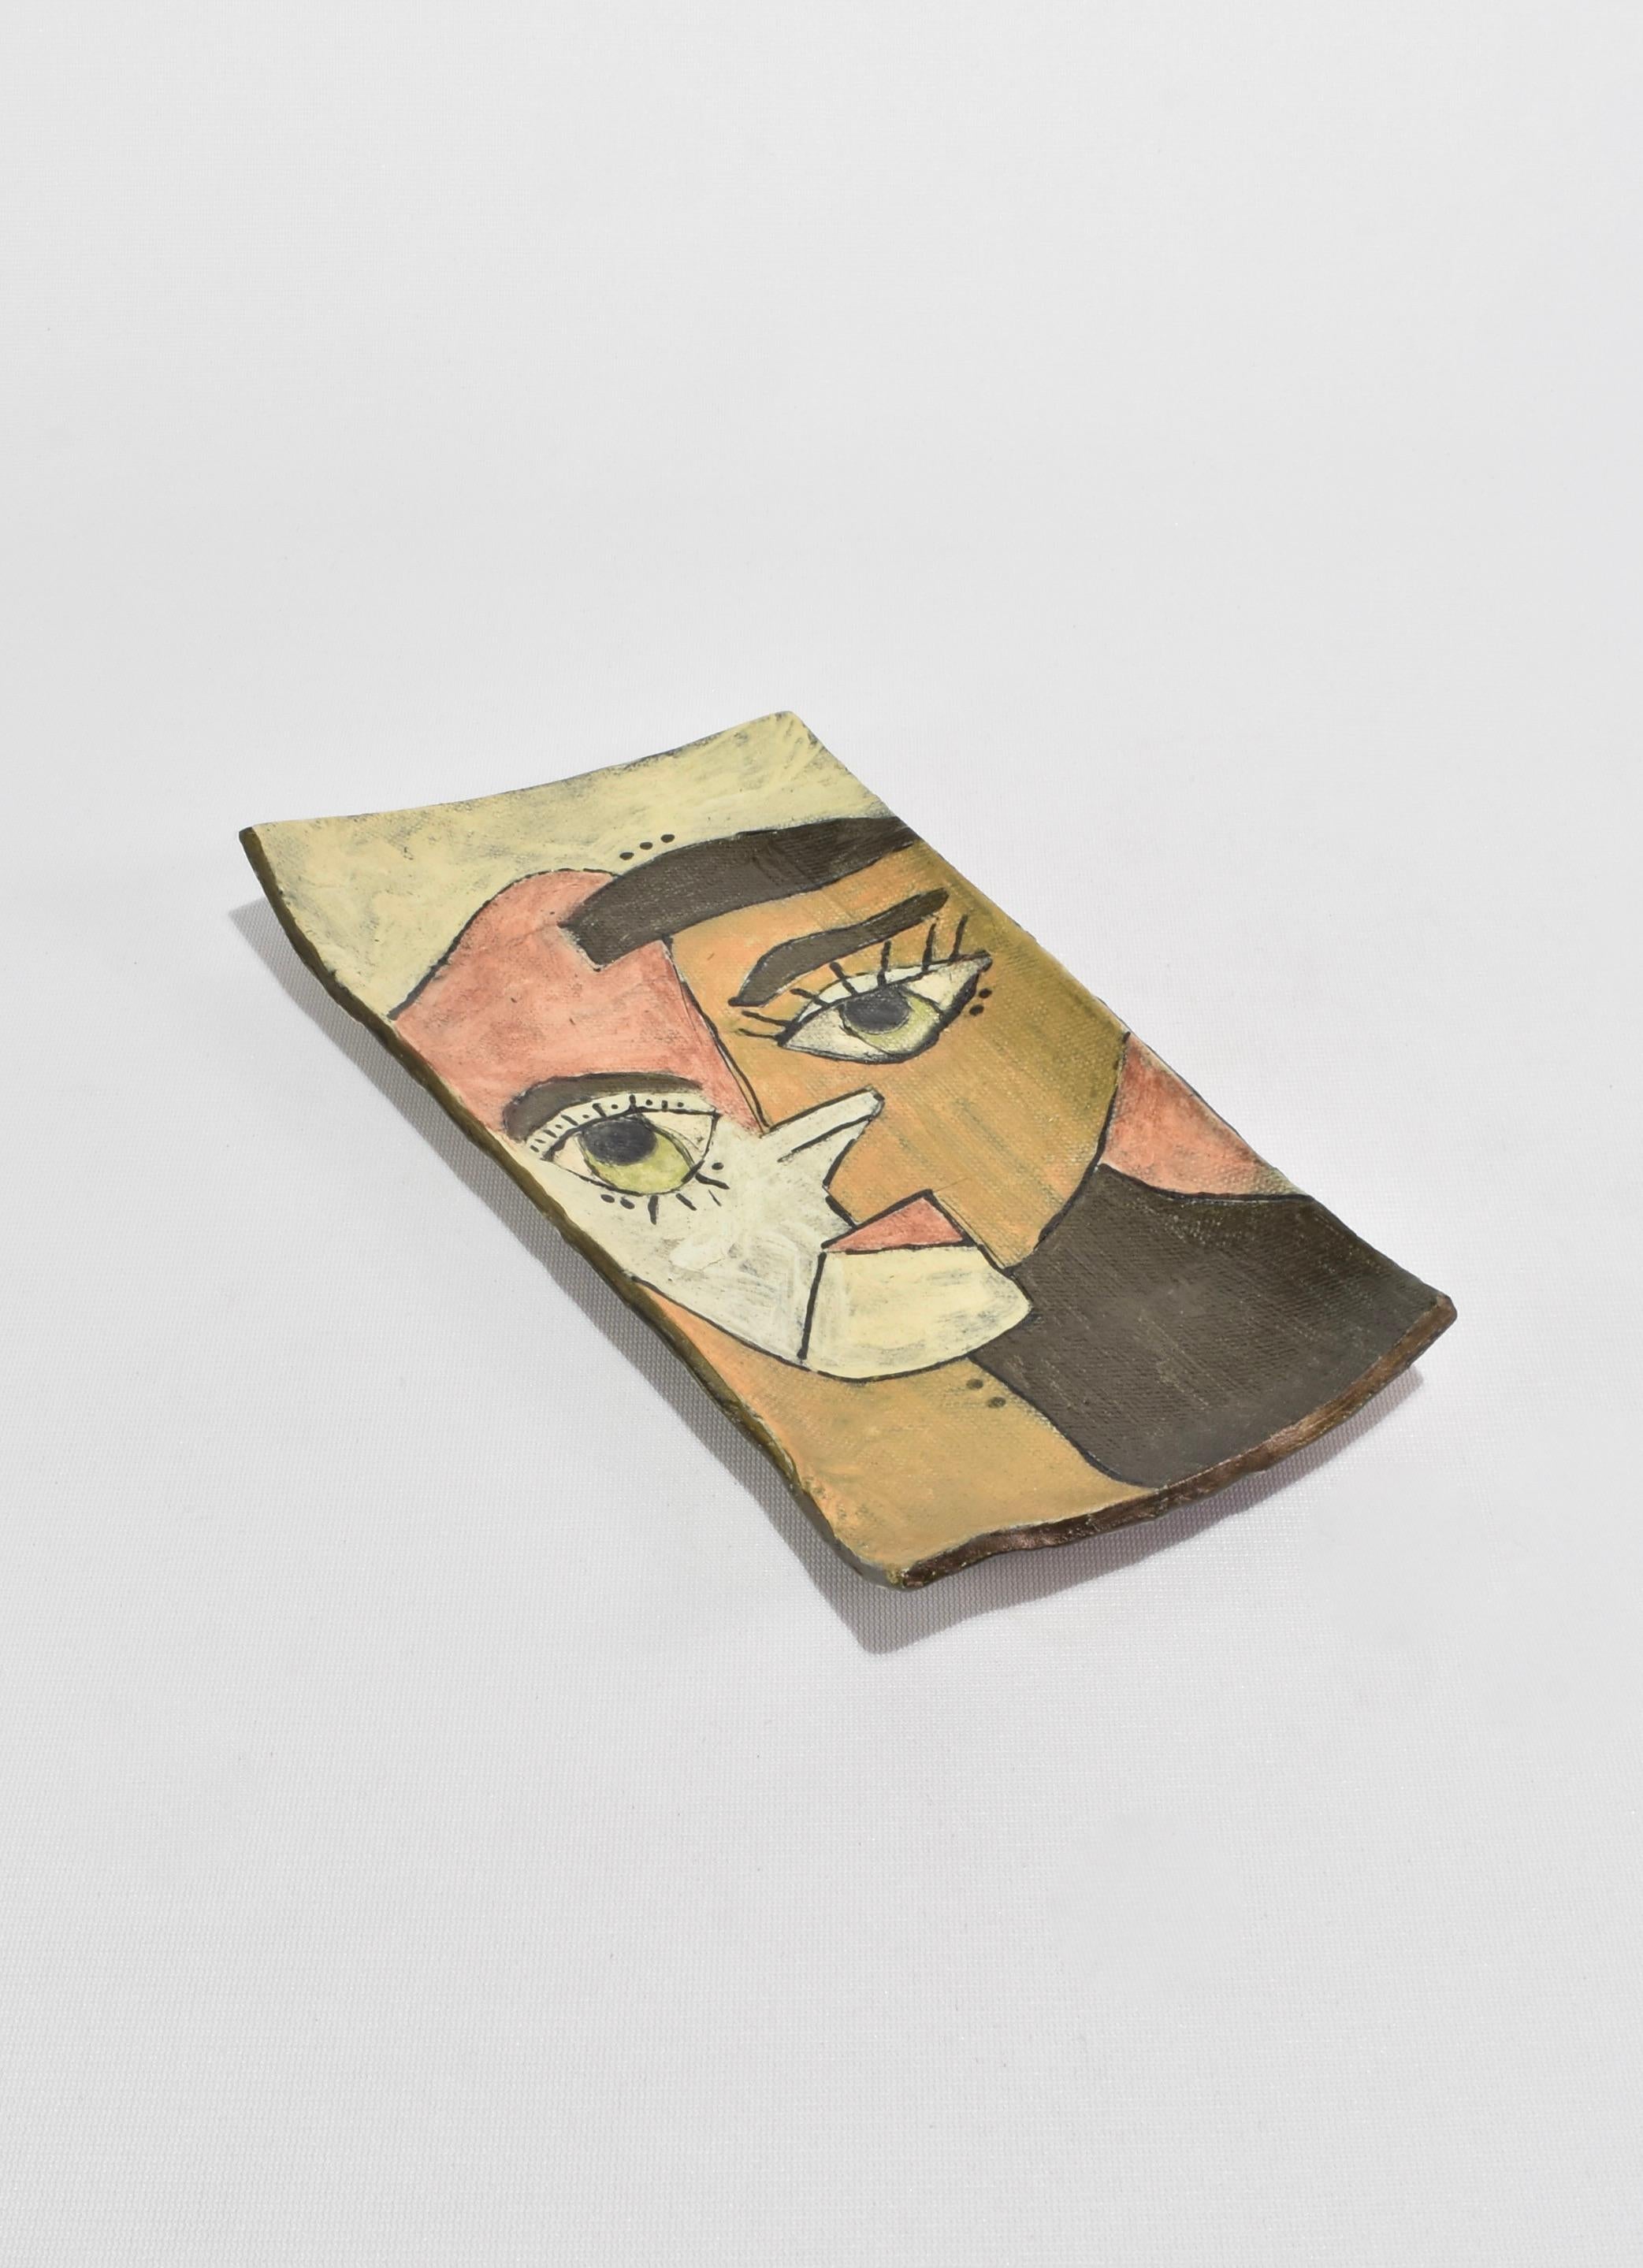 Mid-century handmade ceramic tray with cubist face detail. ﻿Signed on base.